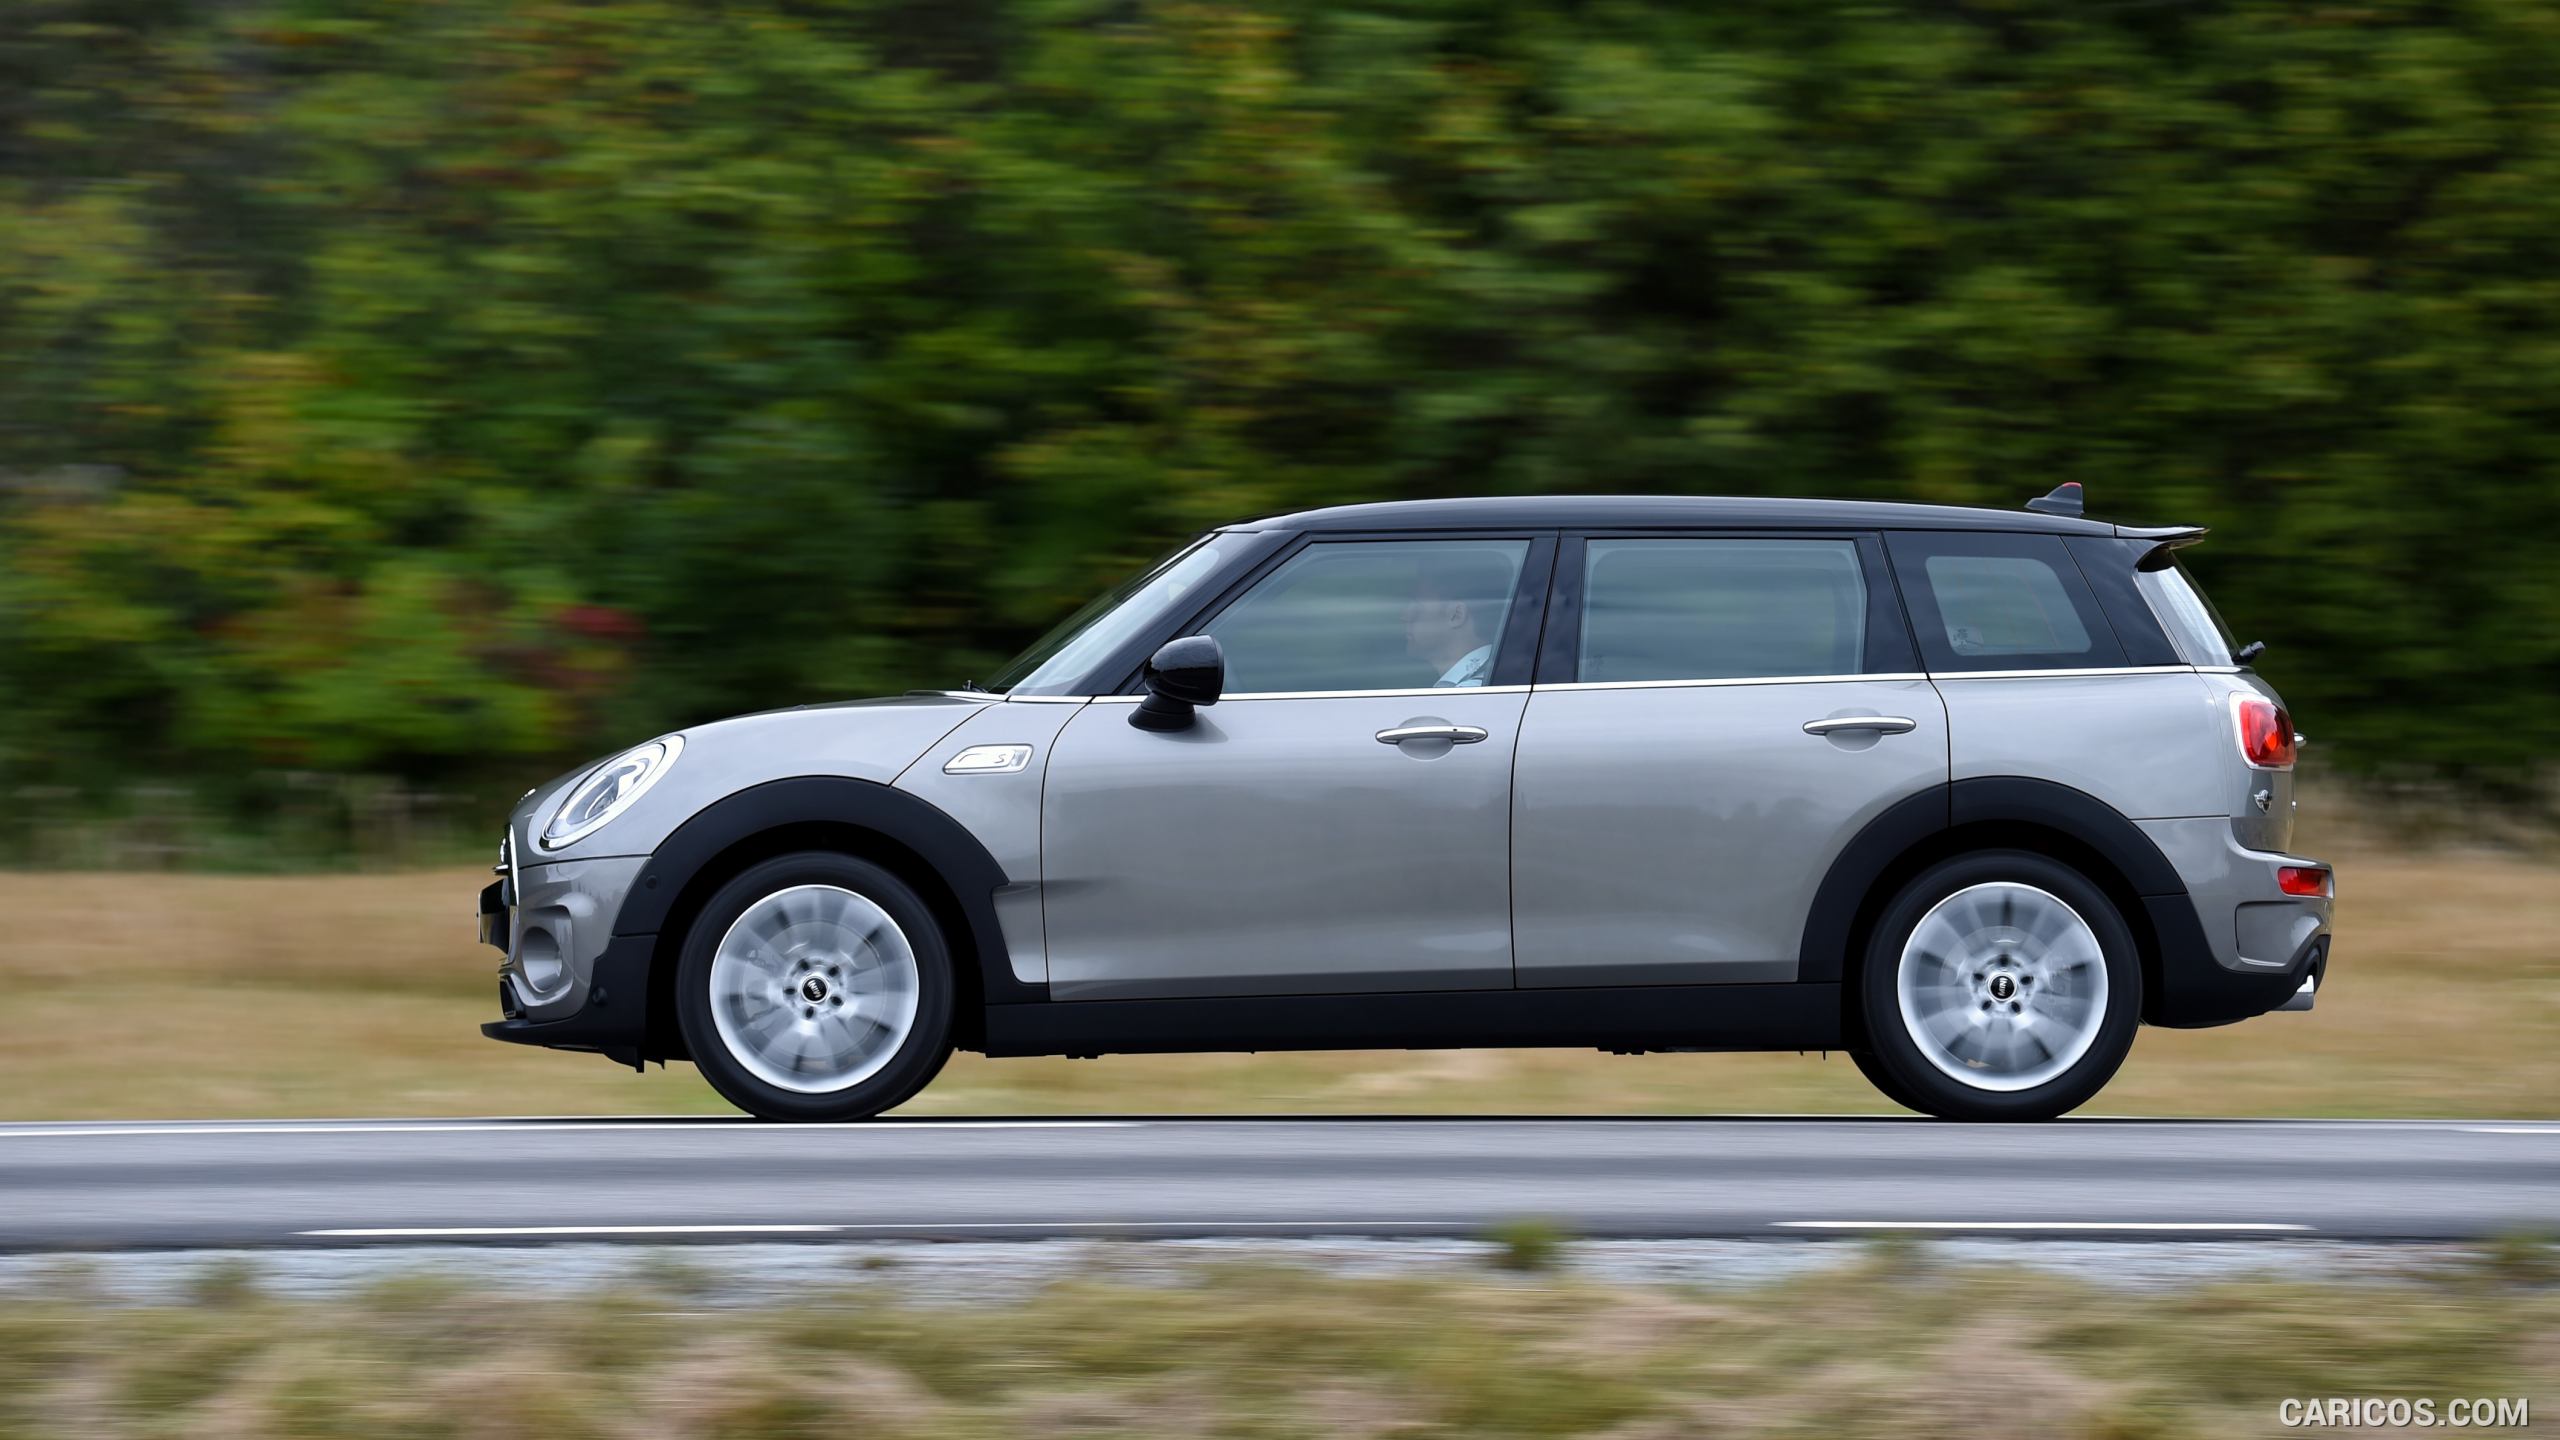 2016 MINI Cooper S Clubman in Metallic Melting Silver - Side, #155 of 380